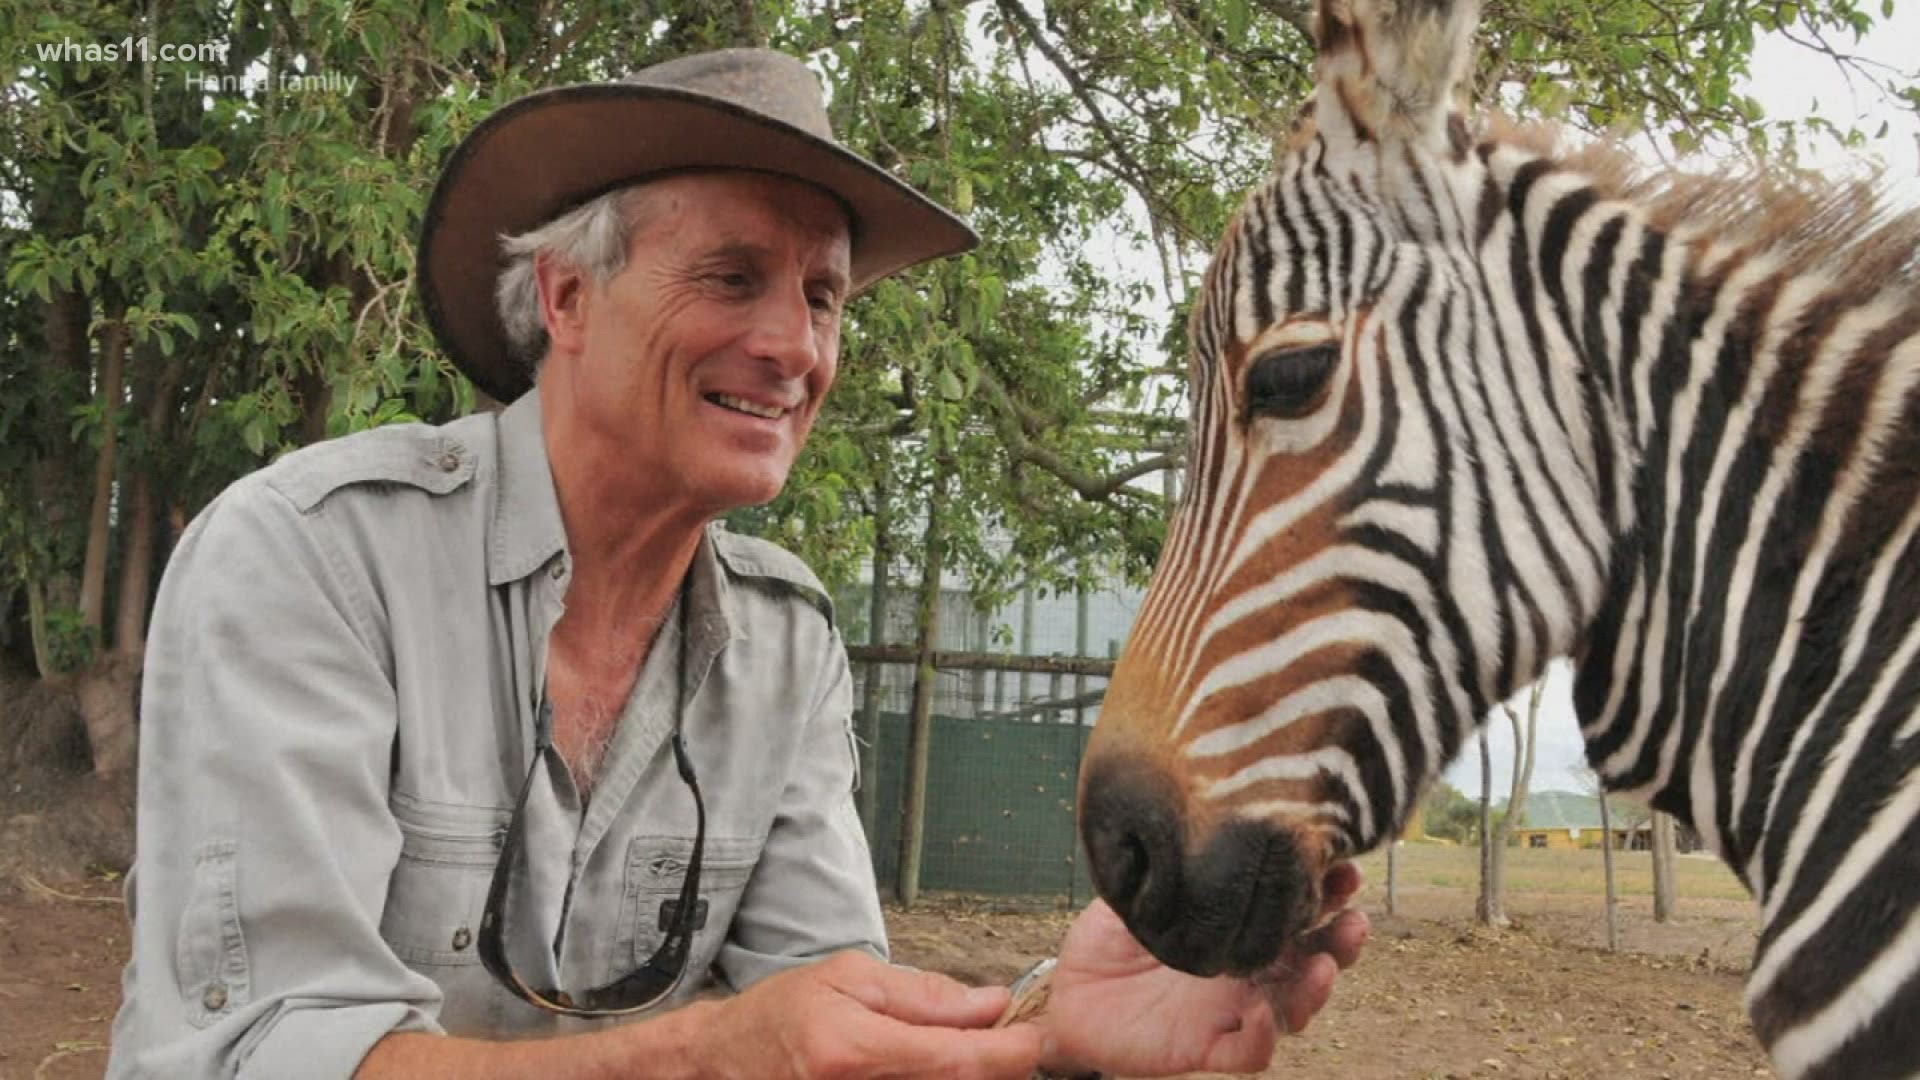 Jack Hanna has been diagnosed with dementia and will retire from public life, according to a letter shared by his family on Wednesday.